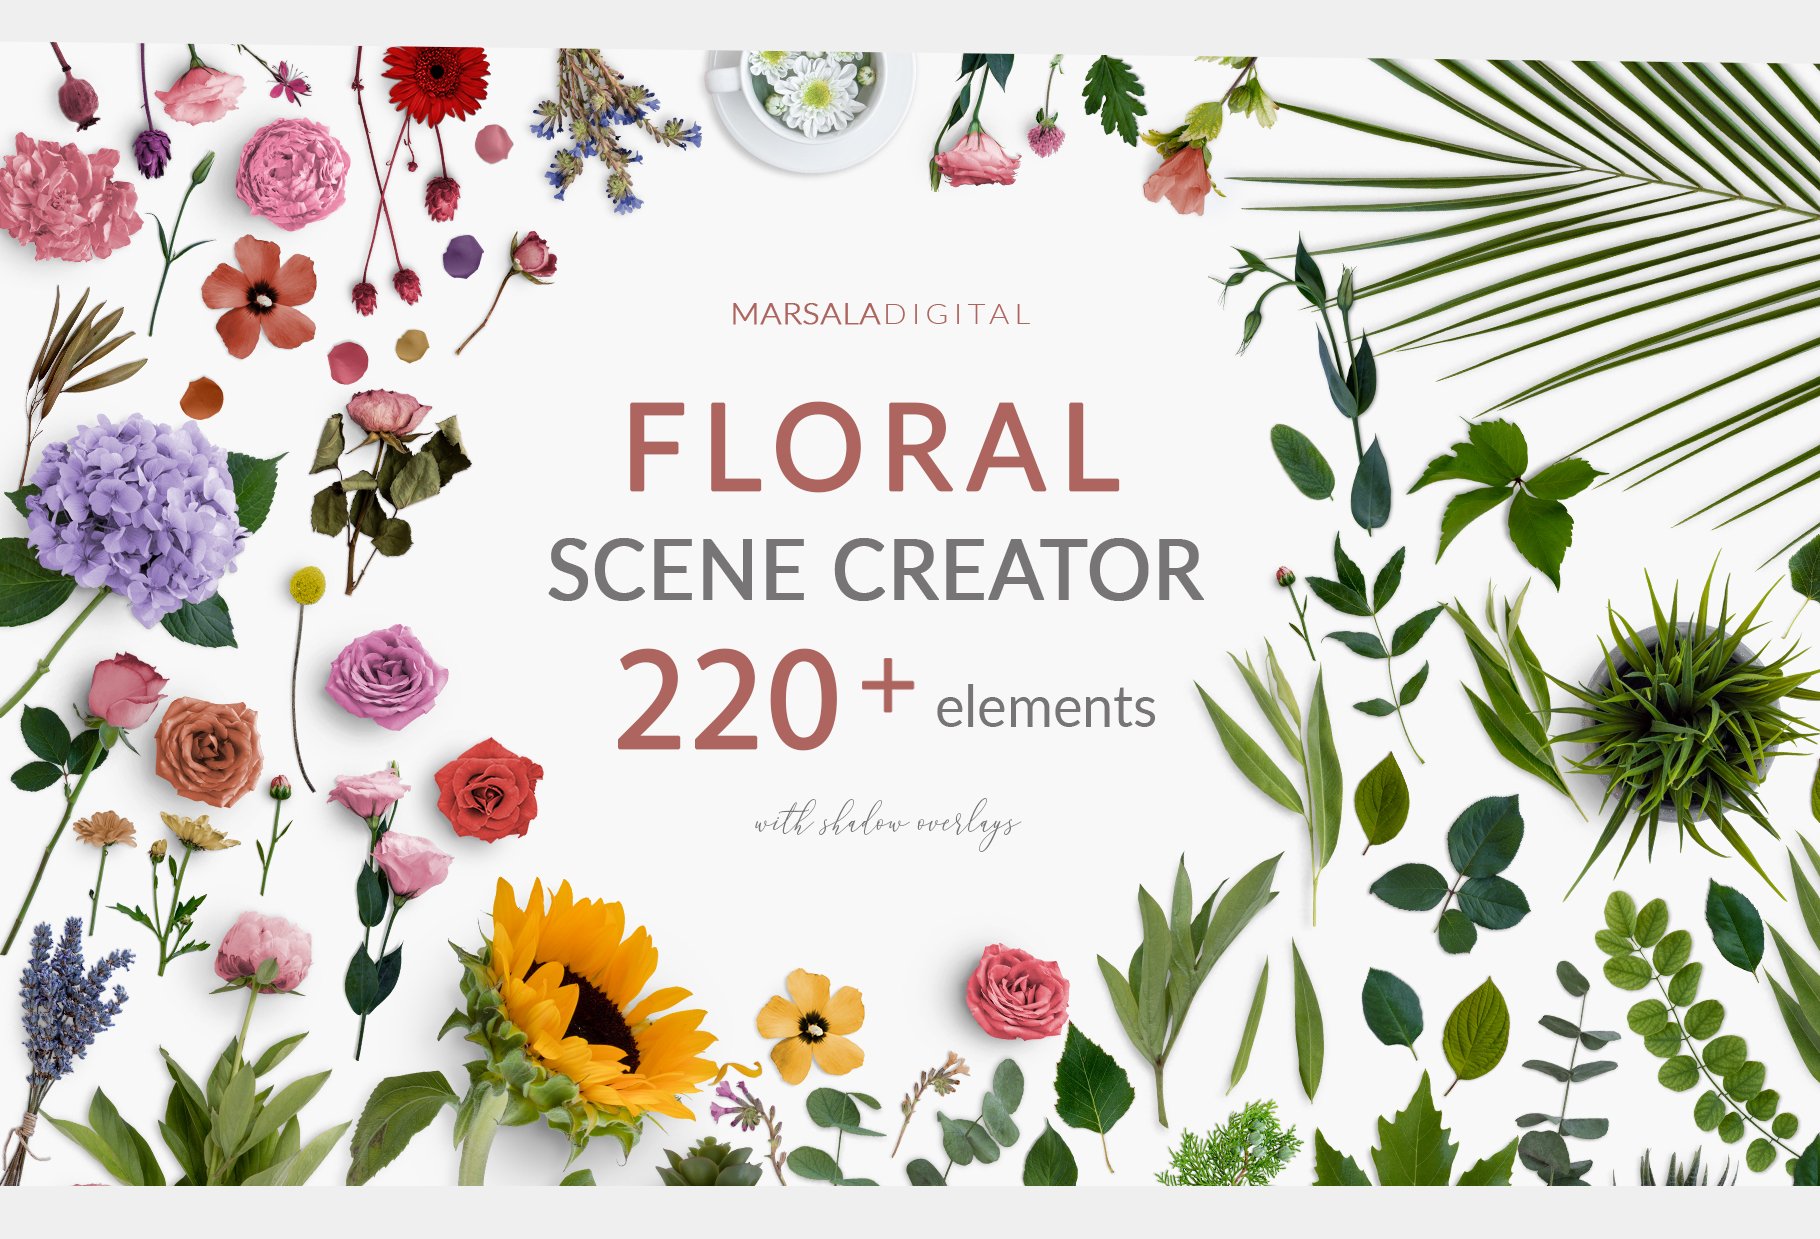 Floral and Greenery Scene Creator cover image.